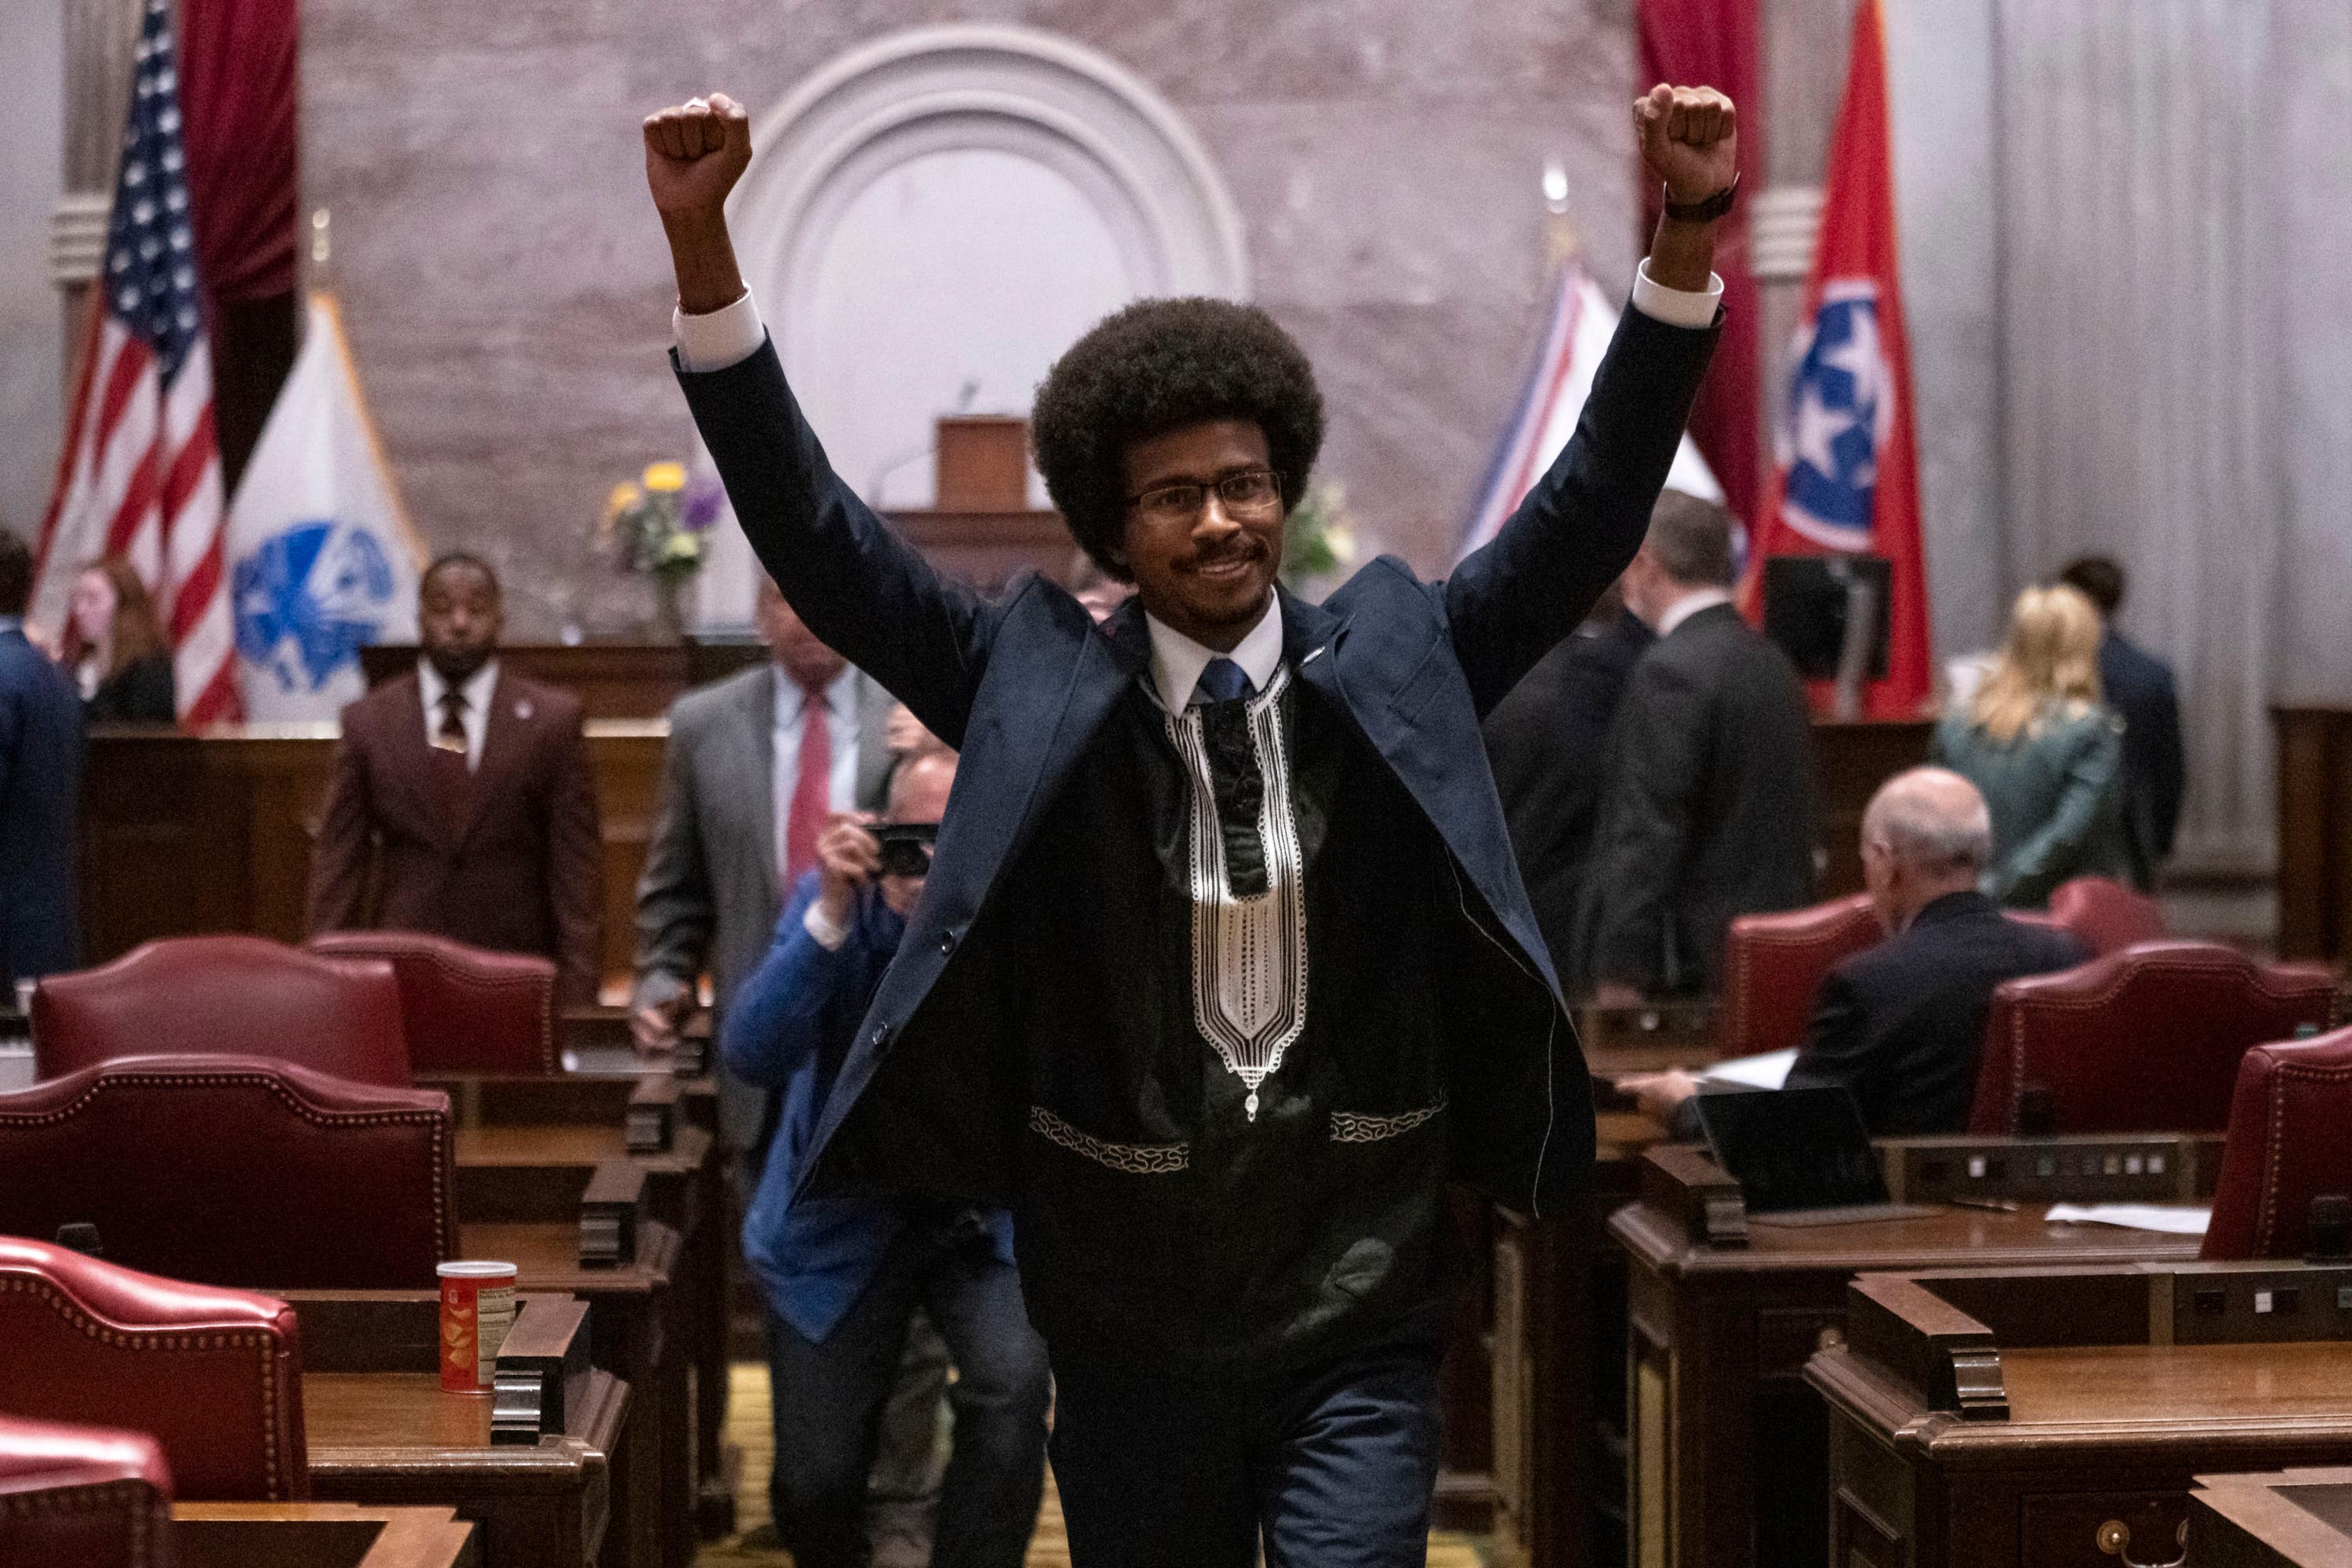 Justin Pearson raises his fists as he leaves the House chamber after he was expelled from the legislature on Thursday.